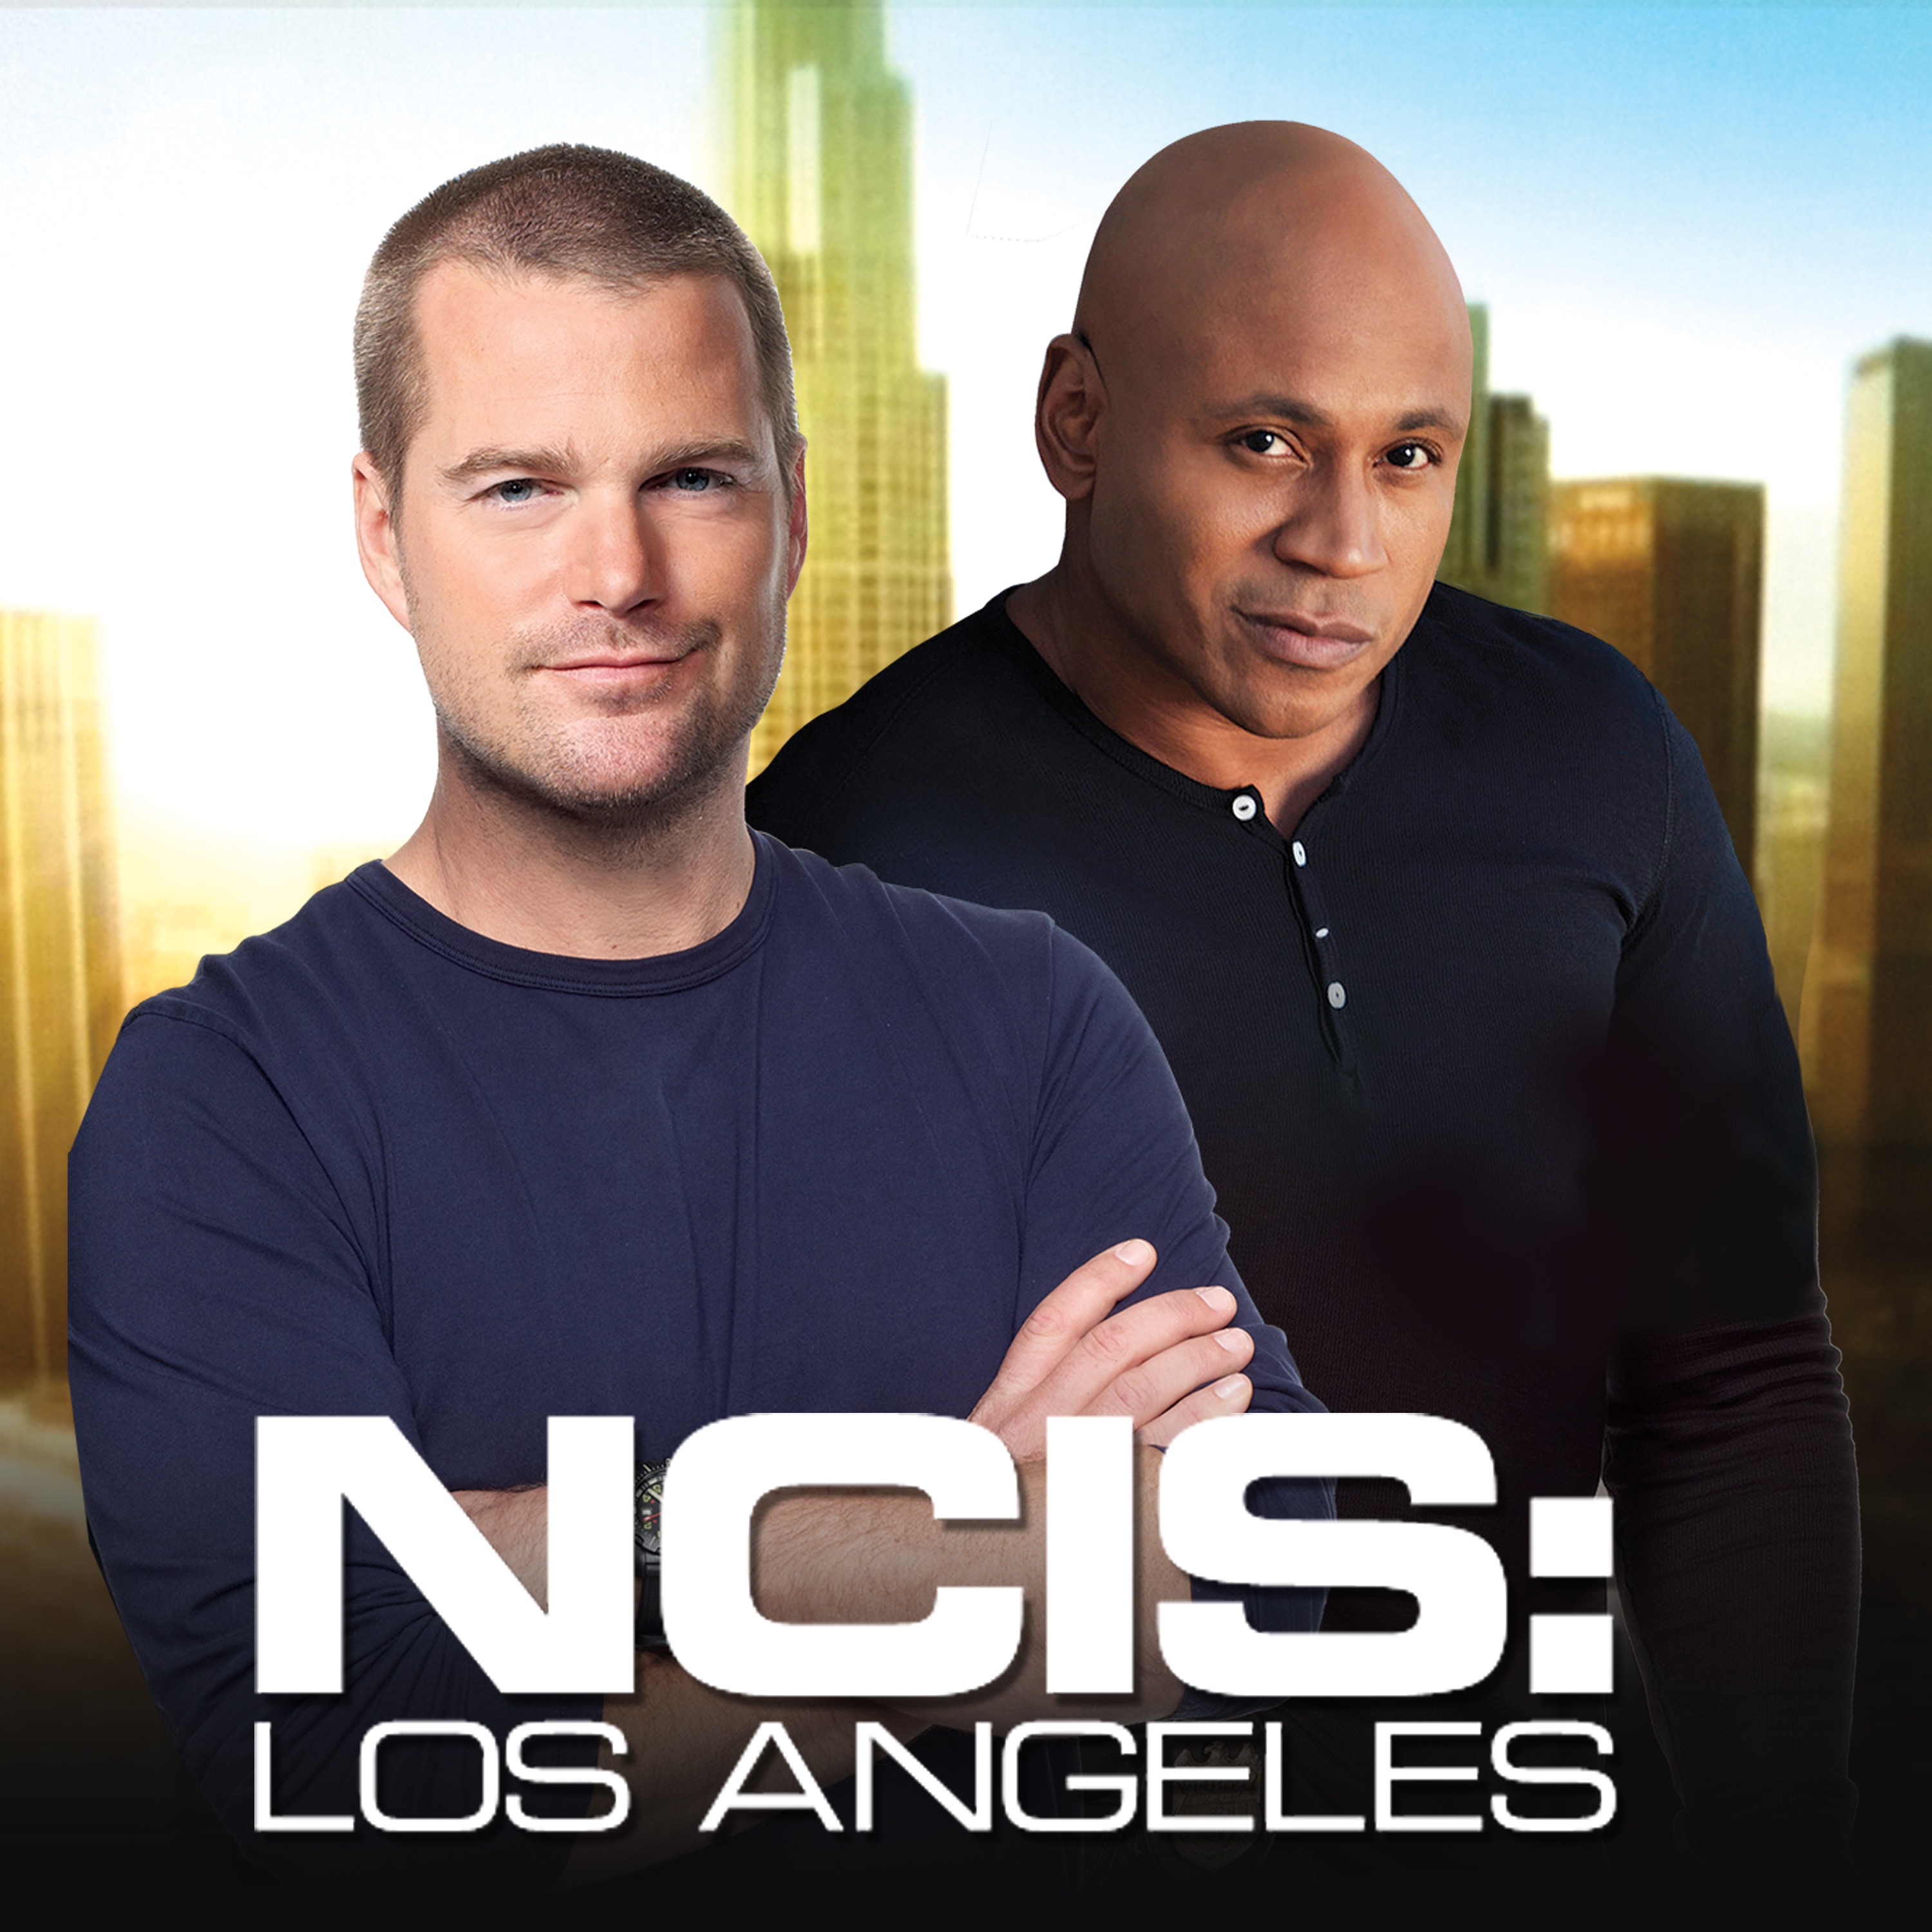 Ncis Los Angeles Season 7 Ncis Los Angeles Season 9 Episode 7 Review